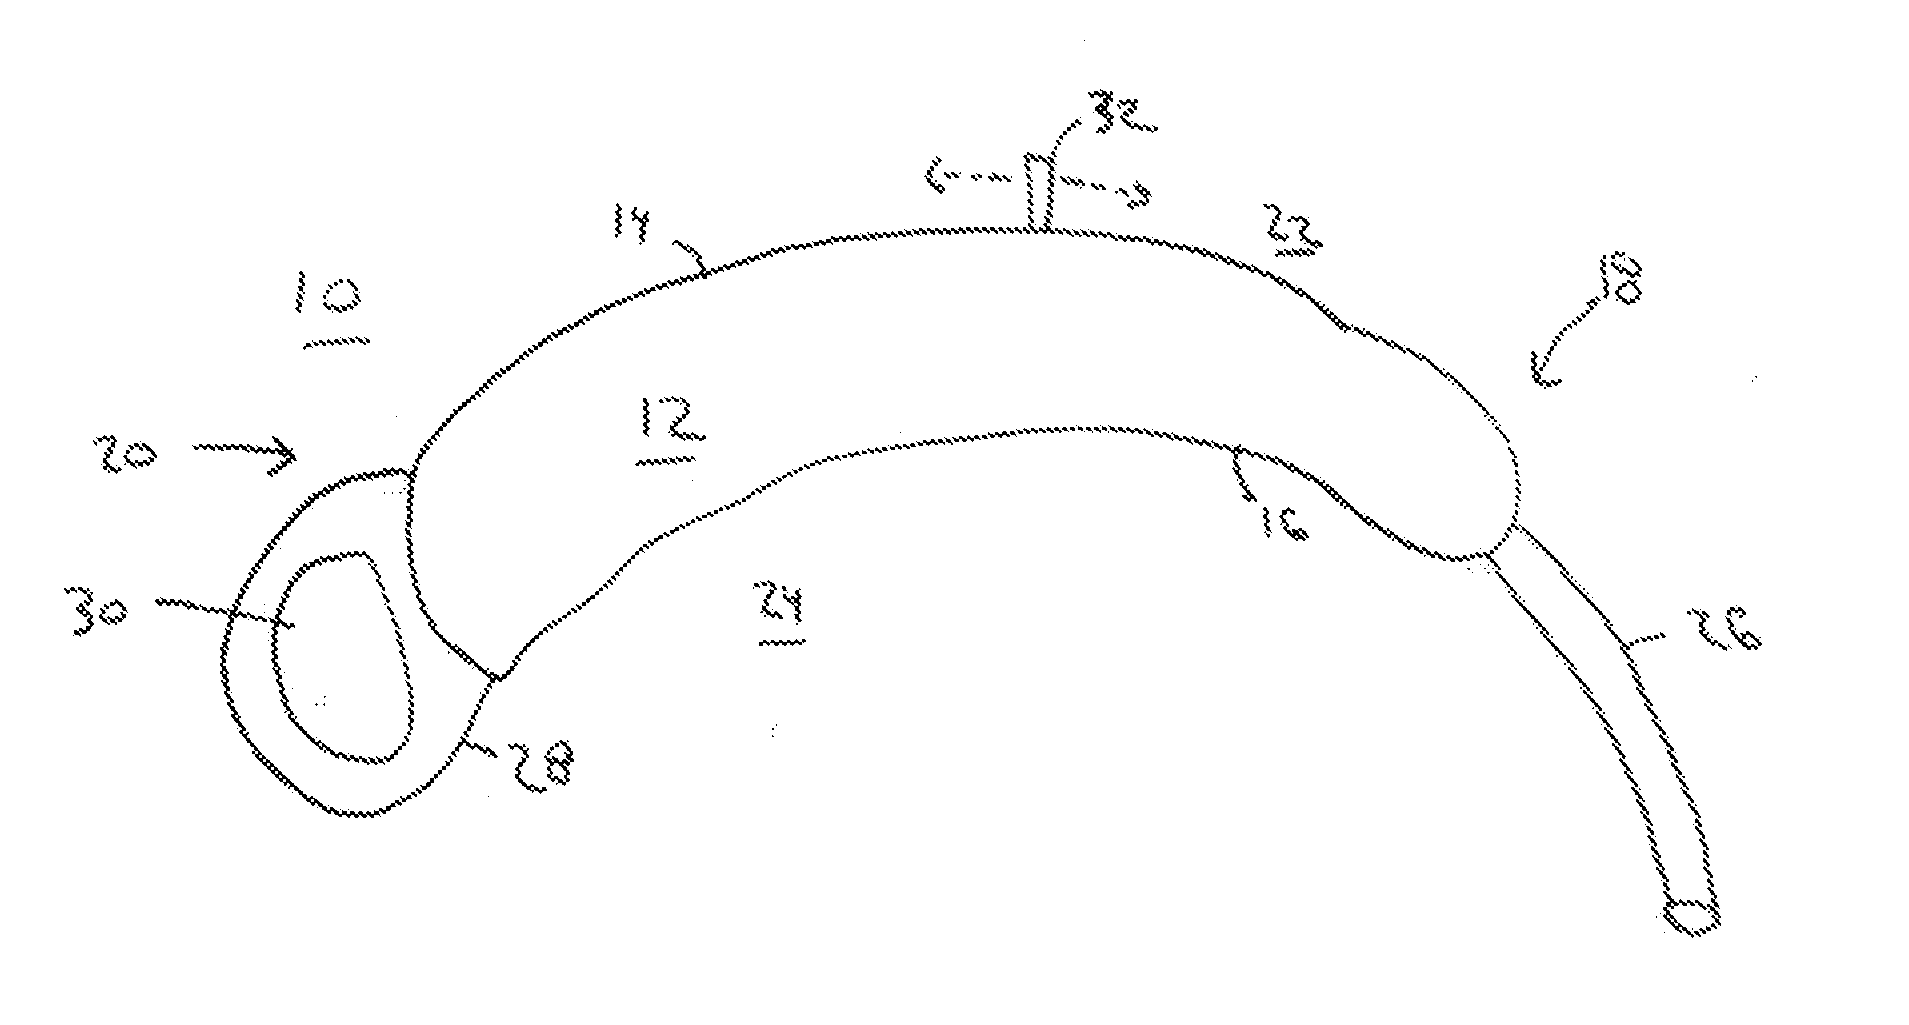 Device and methods for the treatment of hearing conditions